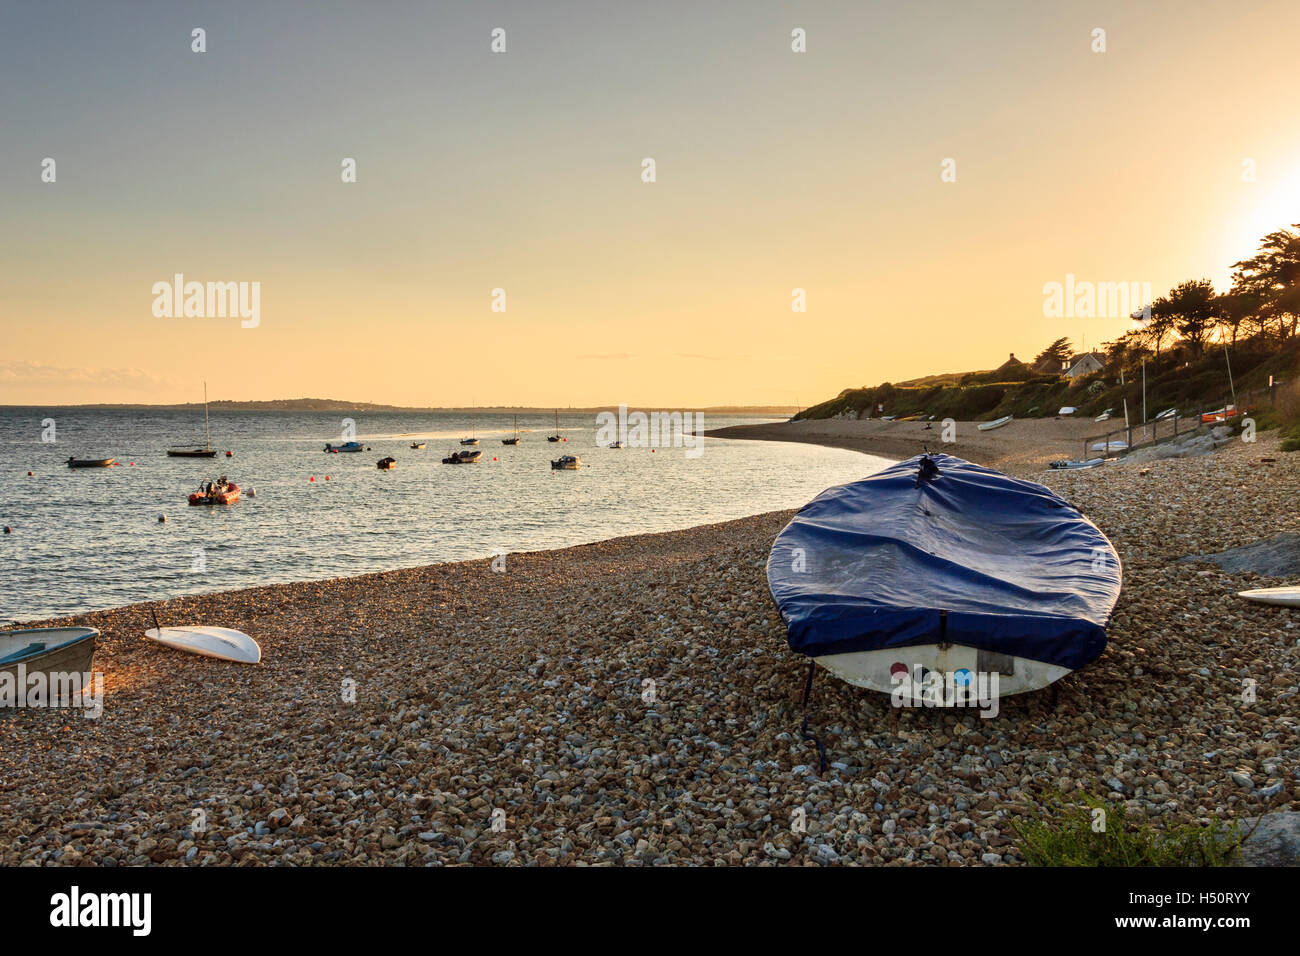 Sunset at Ringstead Bay, Dorset, UK, sailing boats moored in the bay and a tarpaulin-covered dinghy on the shingle beach in the foreground Stock Photo